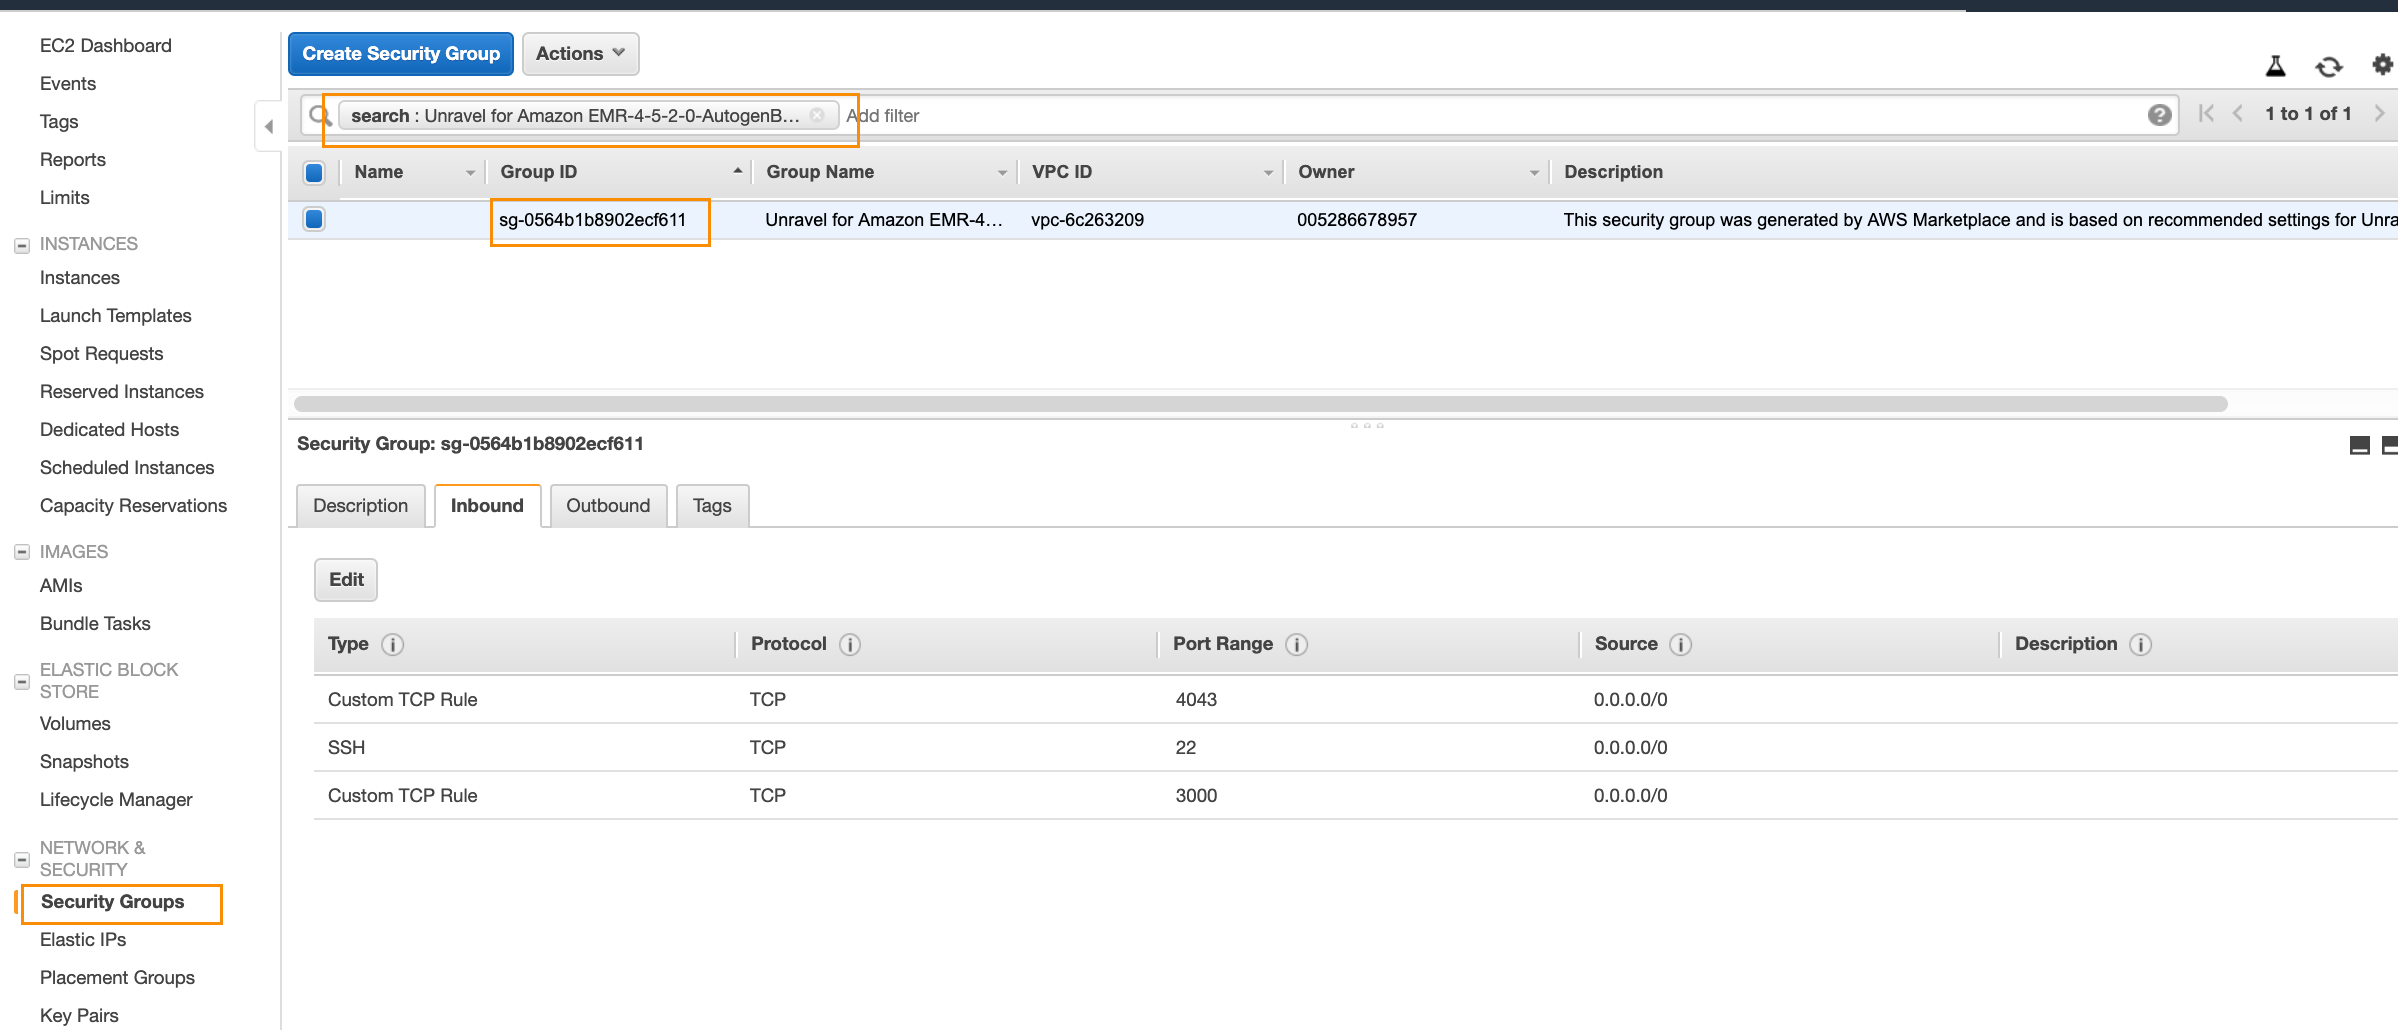 aws-marketplace-step2b-modify-security-group1.png